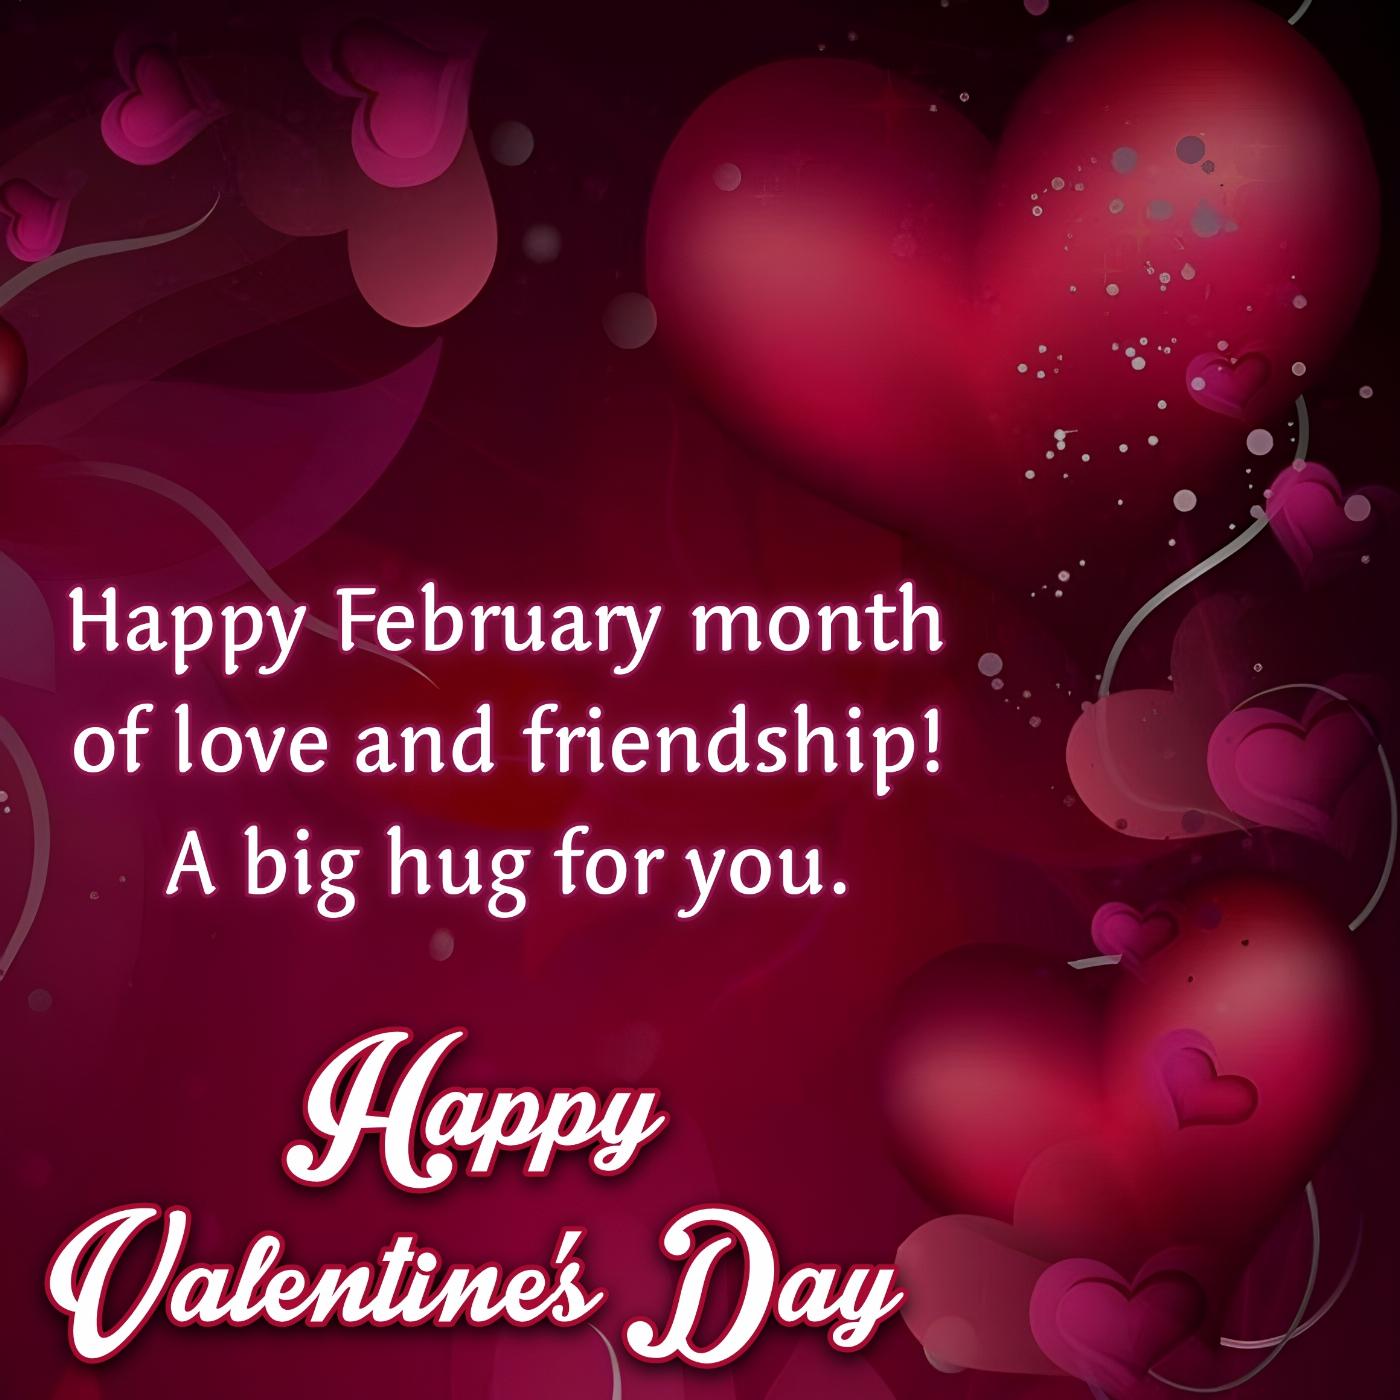 Happy February month of love and friendship